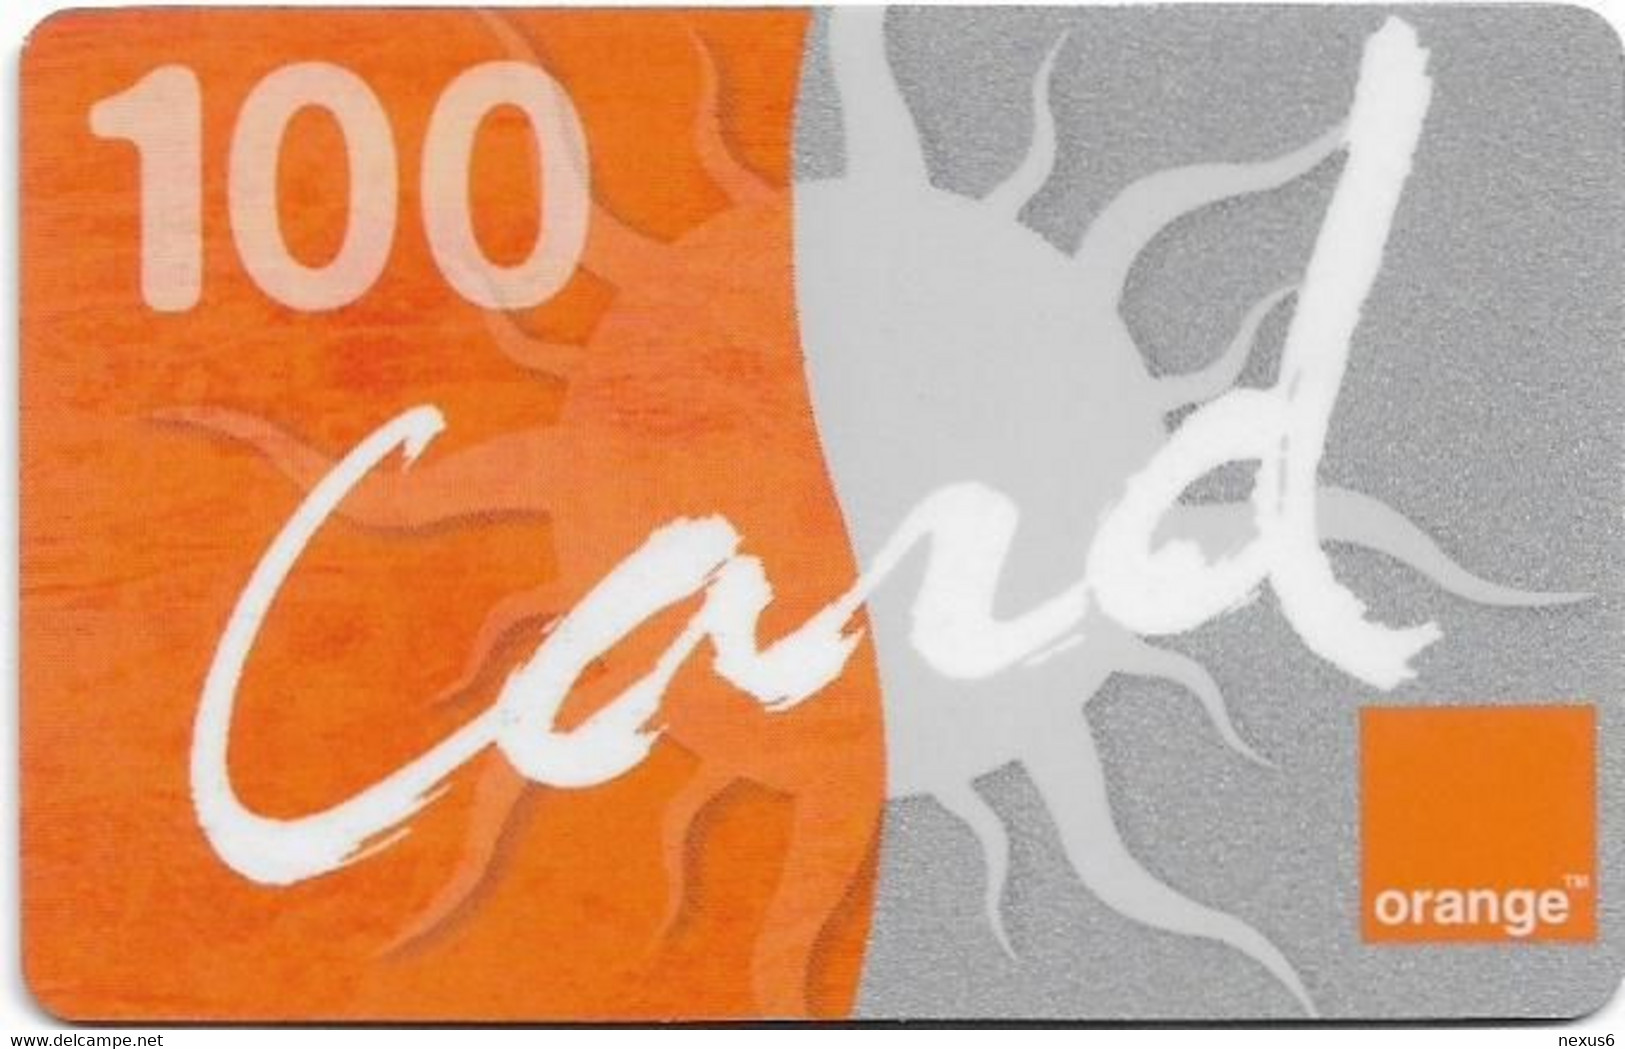 Dominican Rep. - Orange - Card 100, Exp.31.12.2002, GSM Refill 100RD$, Used - Dominicaine